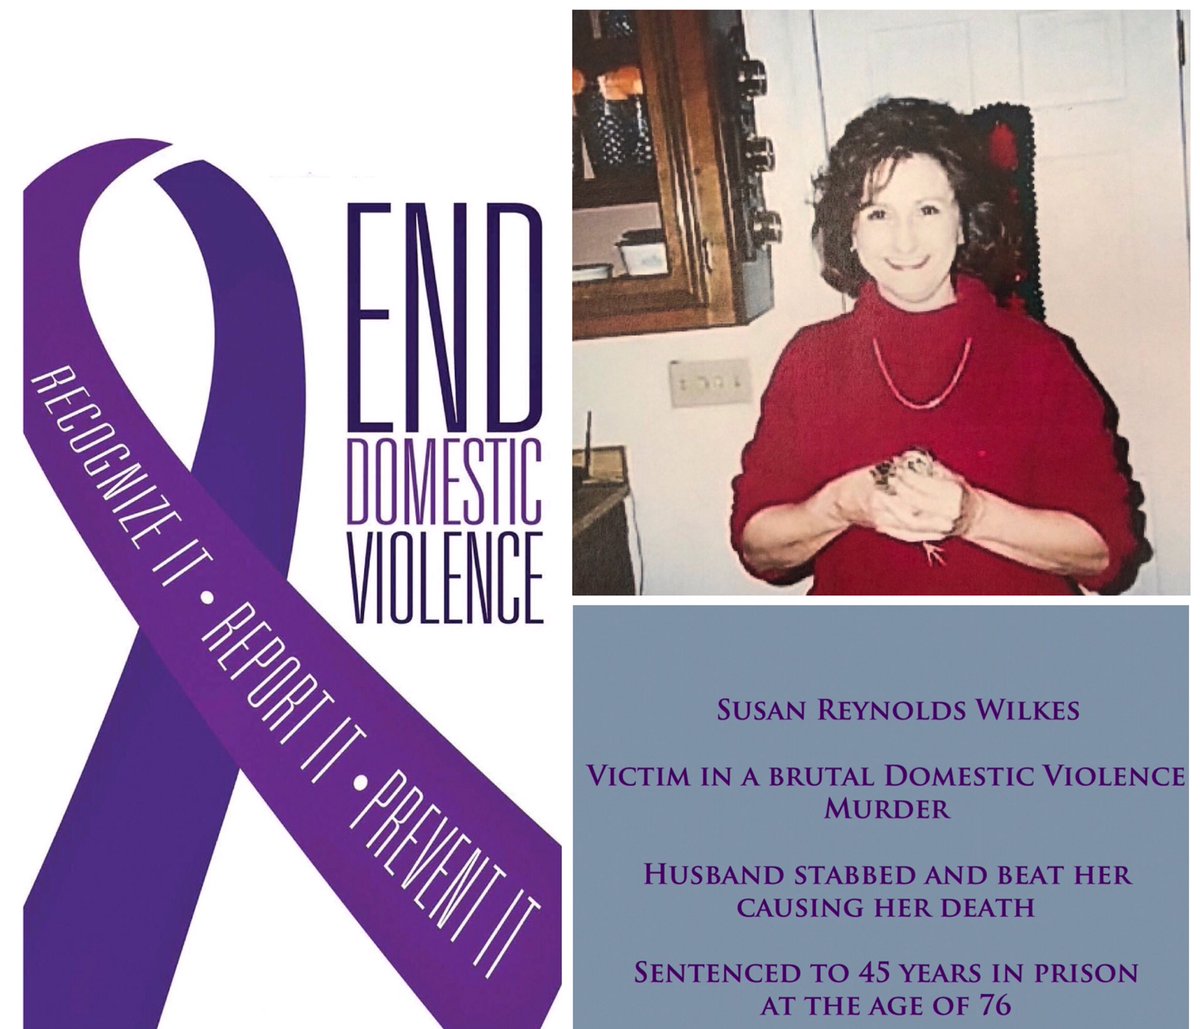 As part of #DVAwarenessMonth we will be looking back at some of the #DV cases our office prosecuted in 2018. 

In March, a Lexington County jury convicted Marion C. Wilkes, age 76, of Murder. He was sentenced to 45 years for the stabbing death of his wife, Susan Reynolds Wilkes.